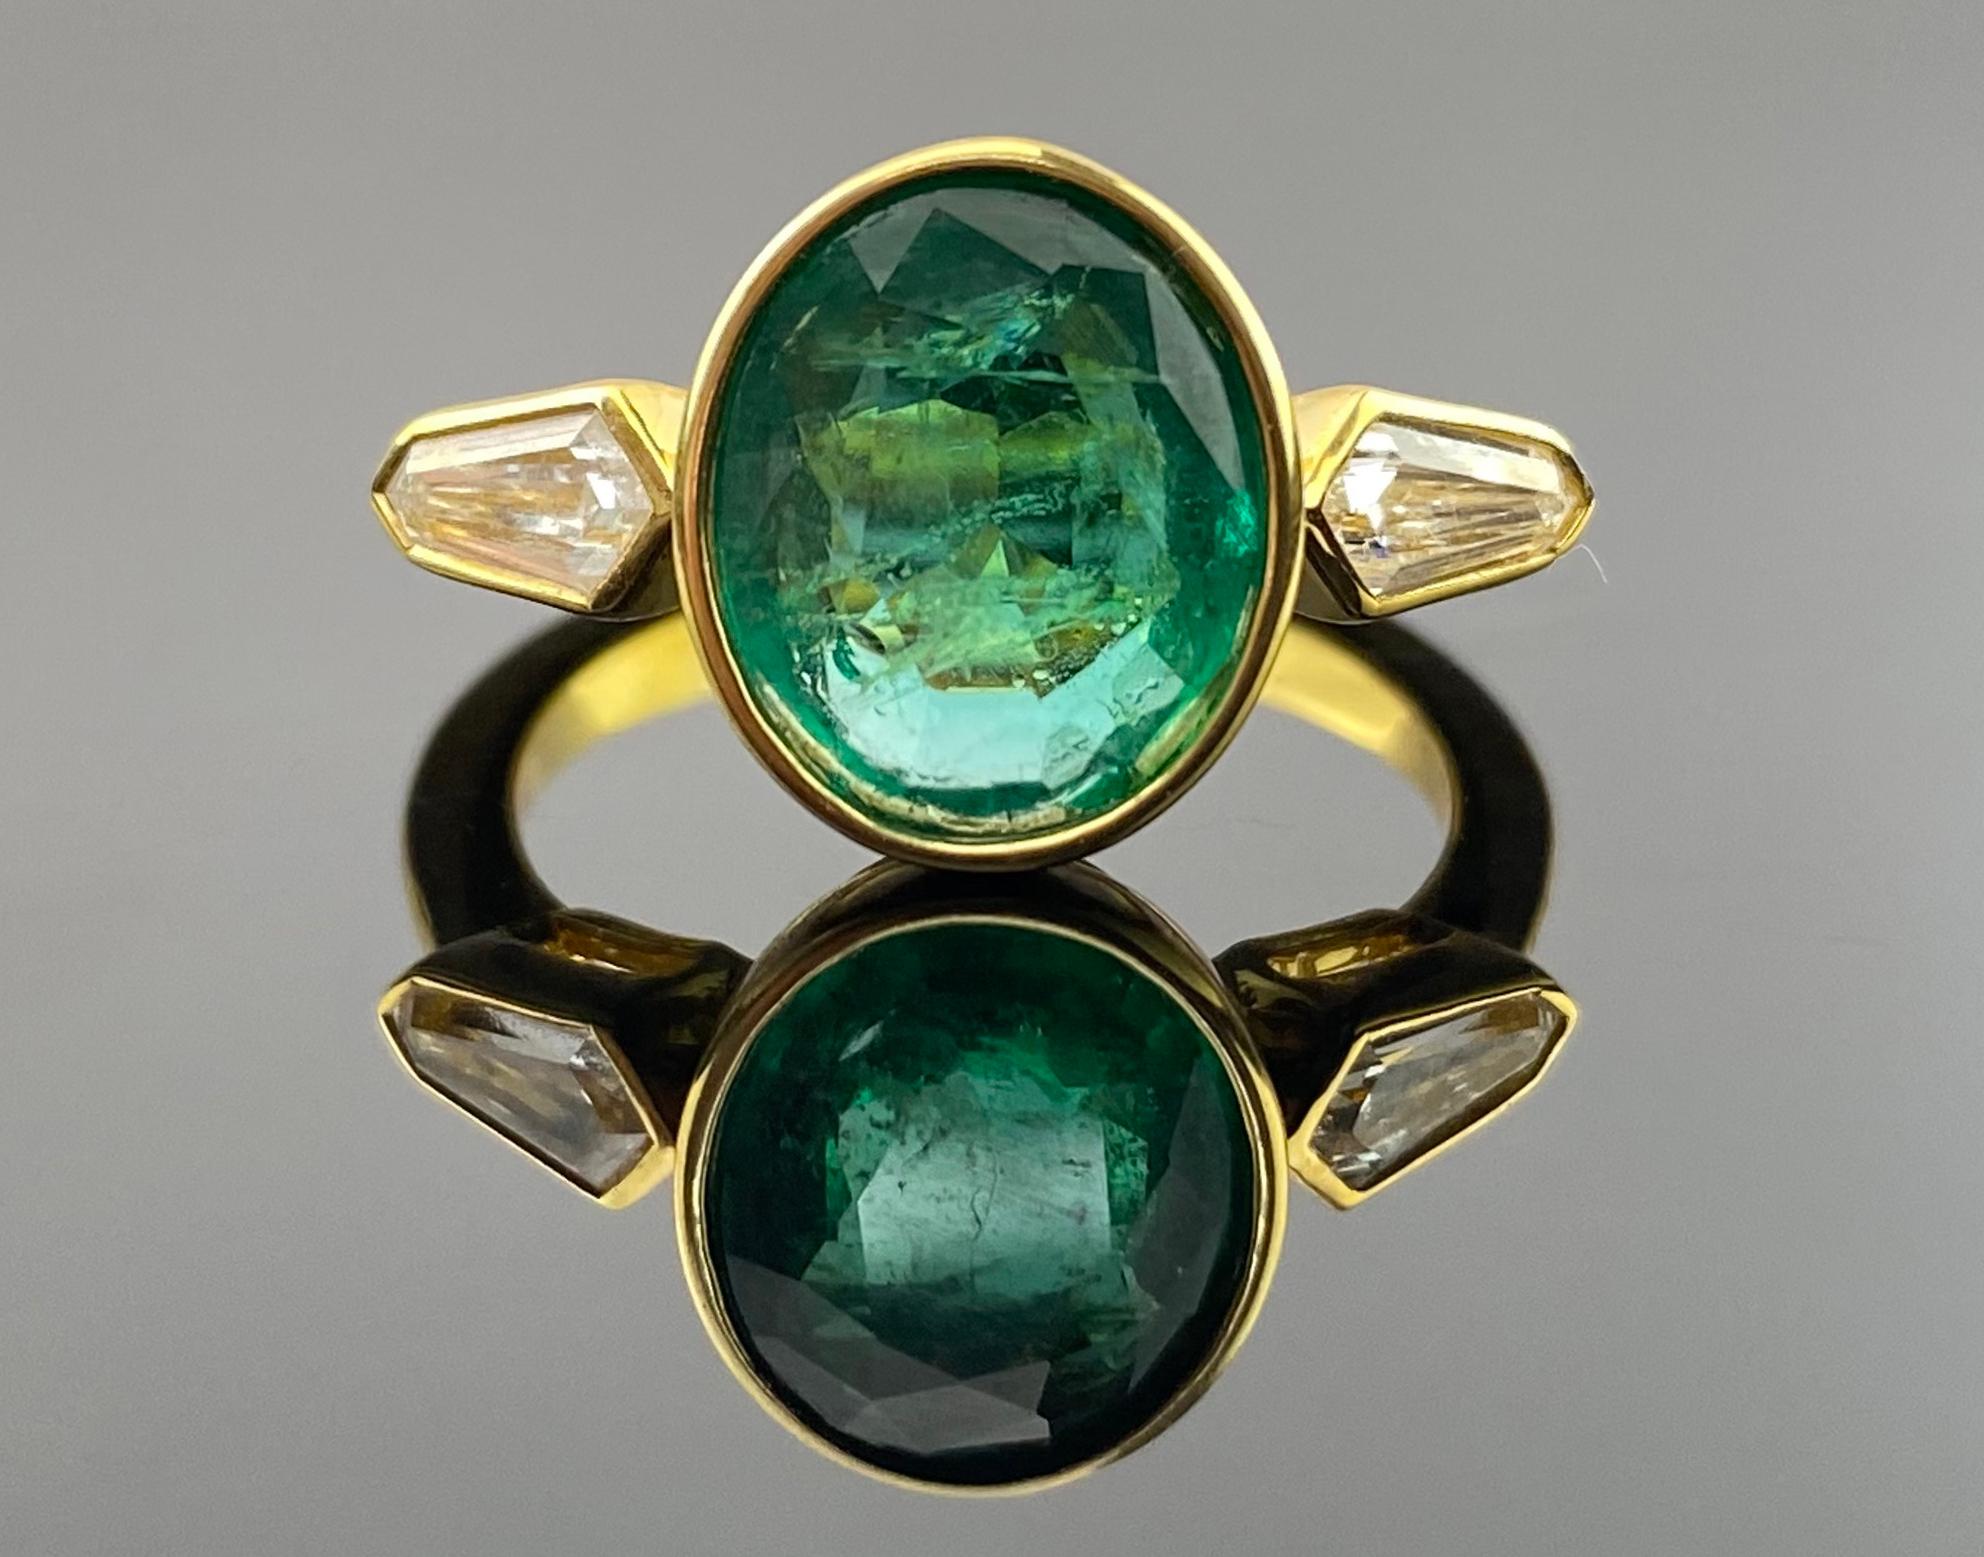 Elevate your style with this exquisite 18K gold ring, featuring a stunning 0.52-carat diamond and a captivating 2.6-carat oval-shaped Zambian Emerald. The combination of these two precious gemstones in a lustrous 18K gold setting creates a